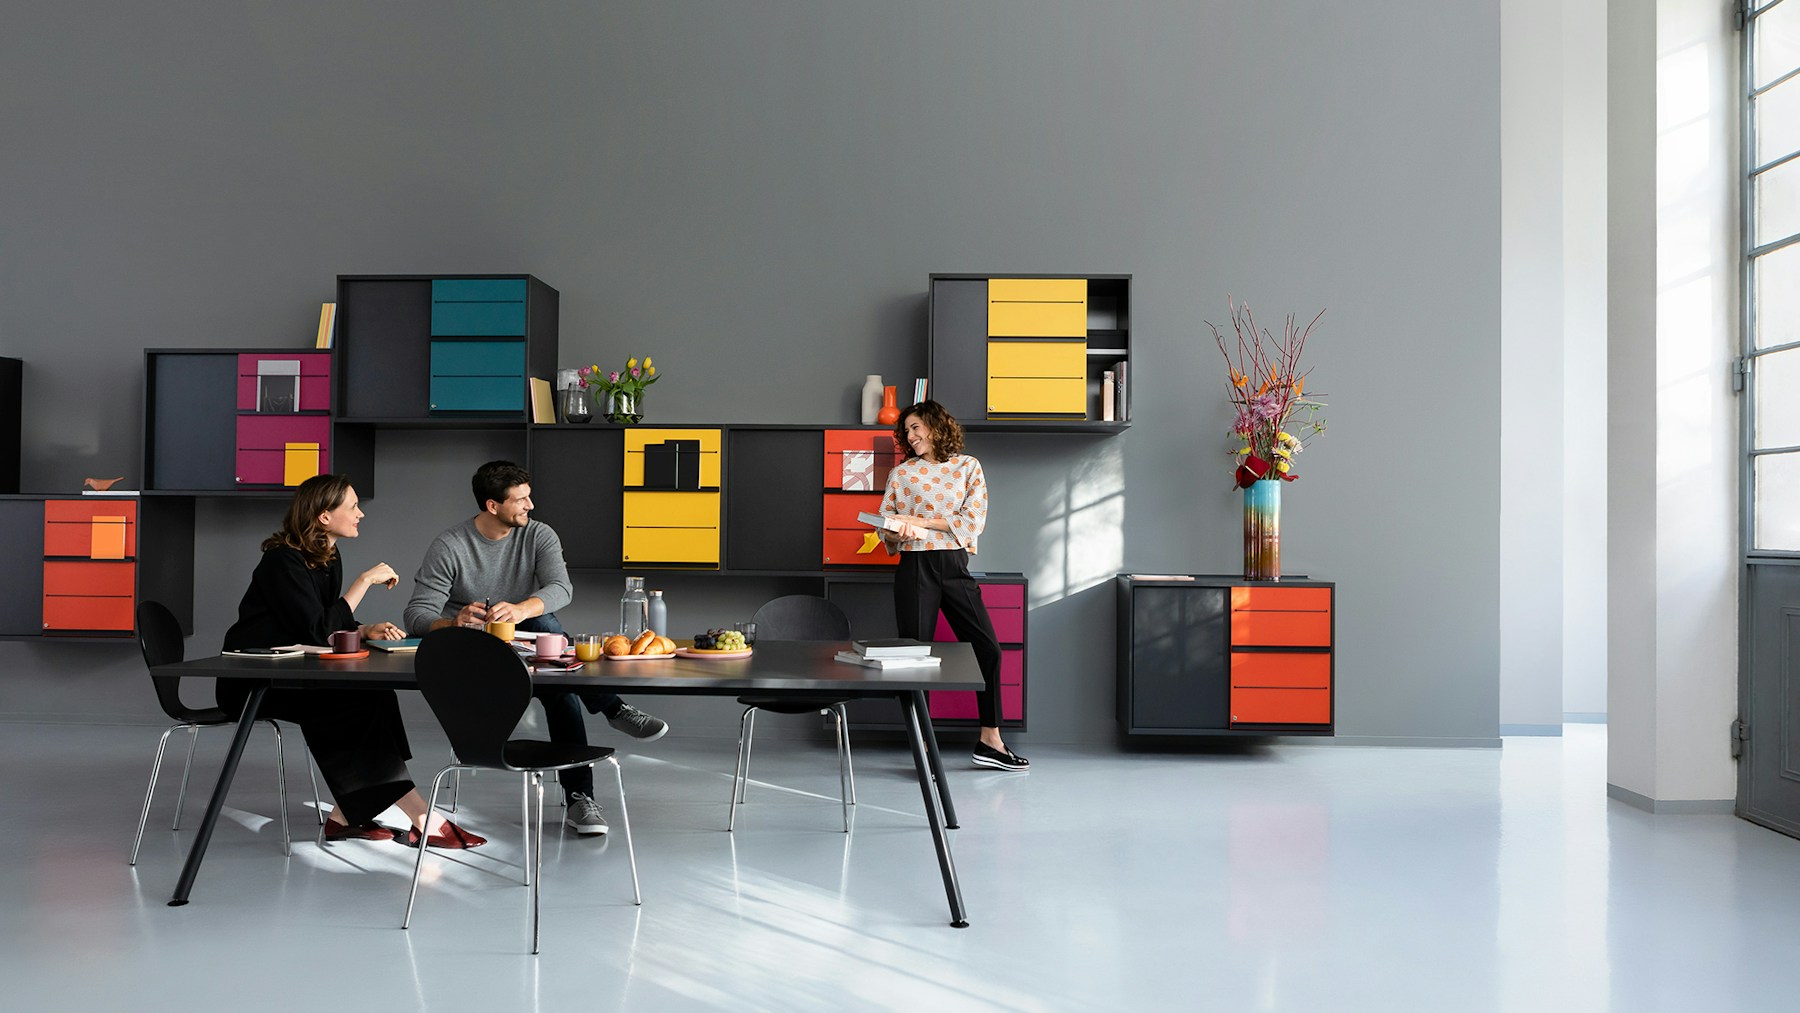 Meeting situation with a conference table in graphit and colorful cupboards on the wall. One woman and one man sit at the conference table. One woman stands in front of the cupboards.